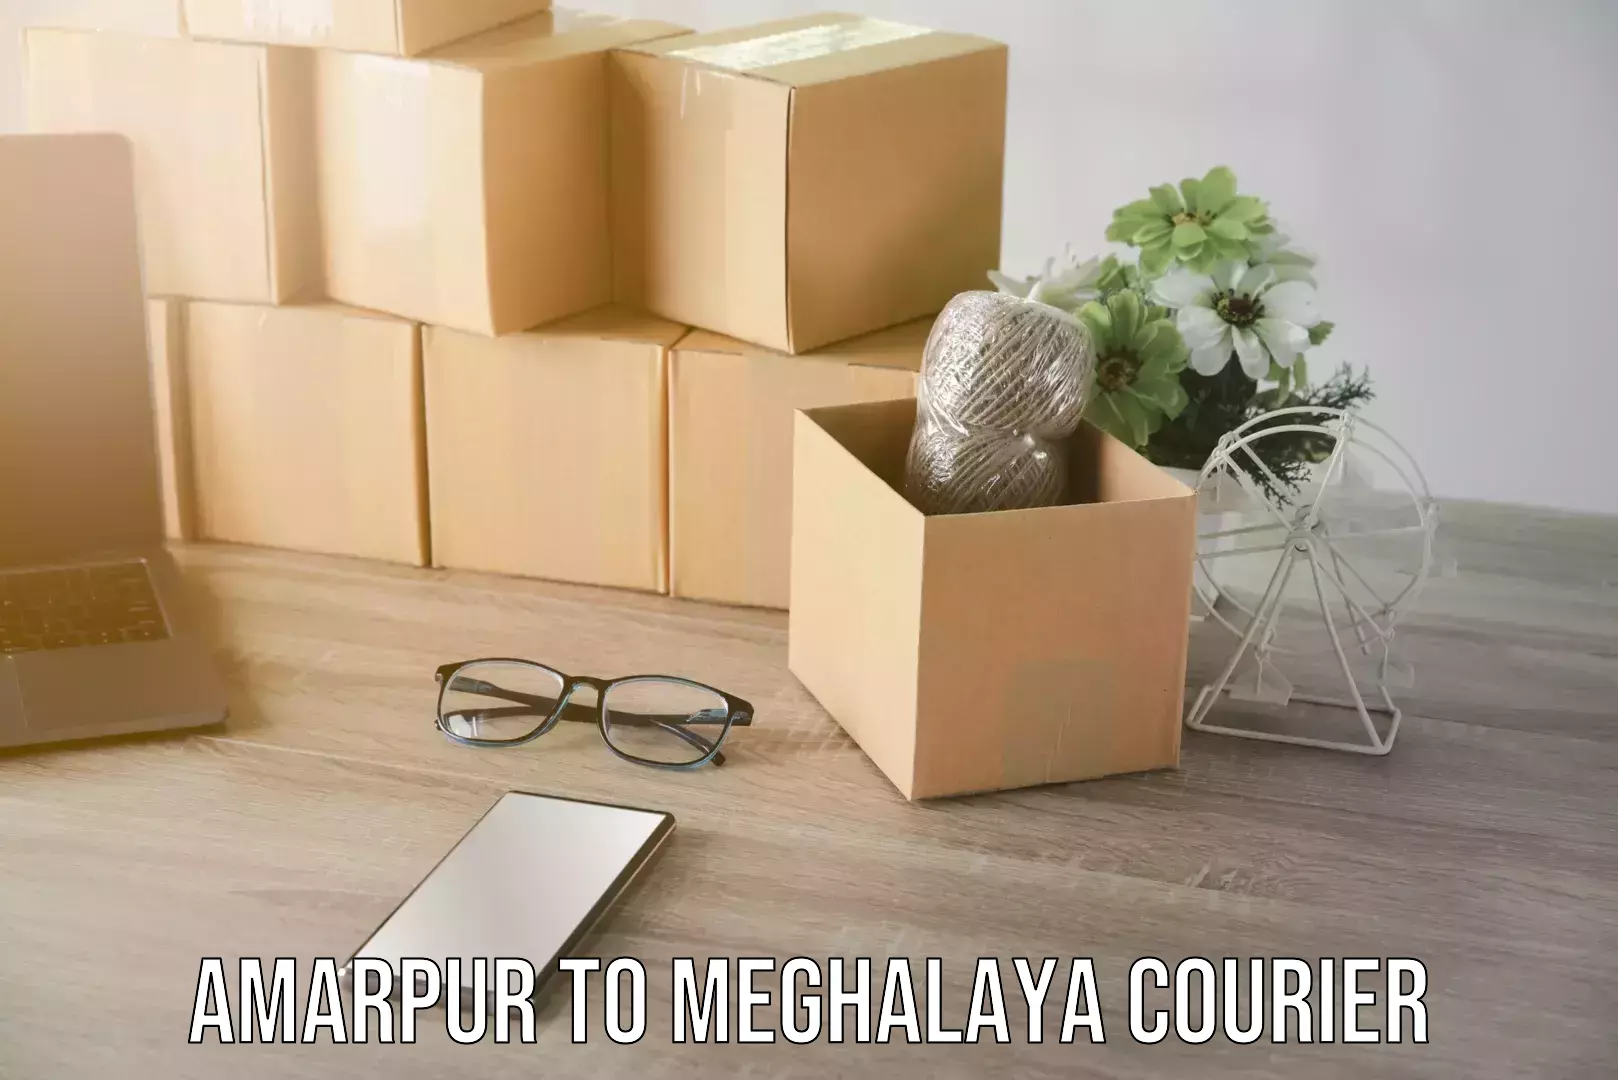 Overnight delivery services Amarpur to Meghalaya